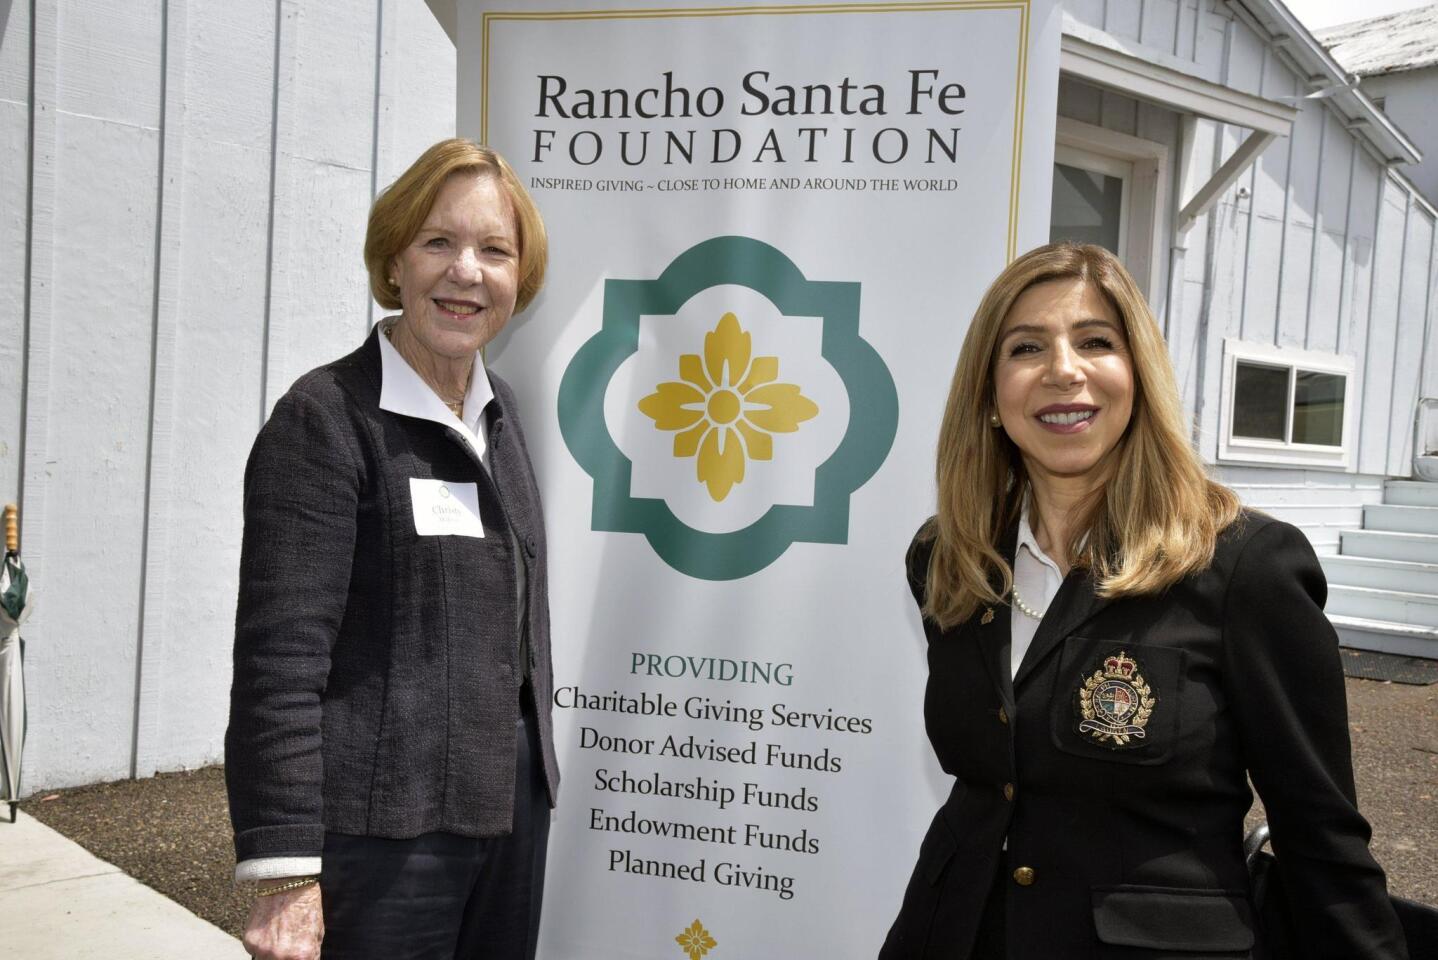 Rancho Santa Fe Foundation Chief Executive Officer Christy Wilson and San Diego County District Attorney Summer Stephan, a national leader in the fight against human trafficking